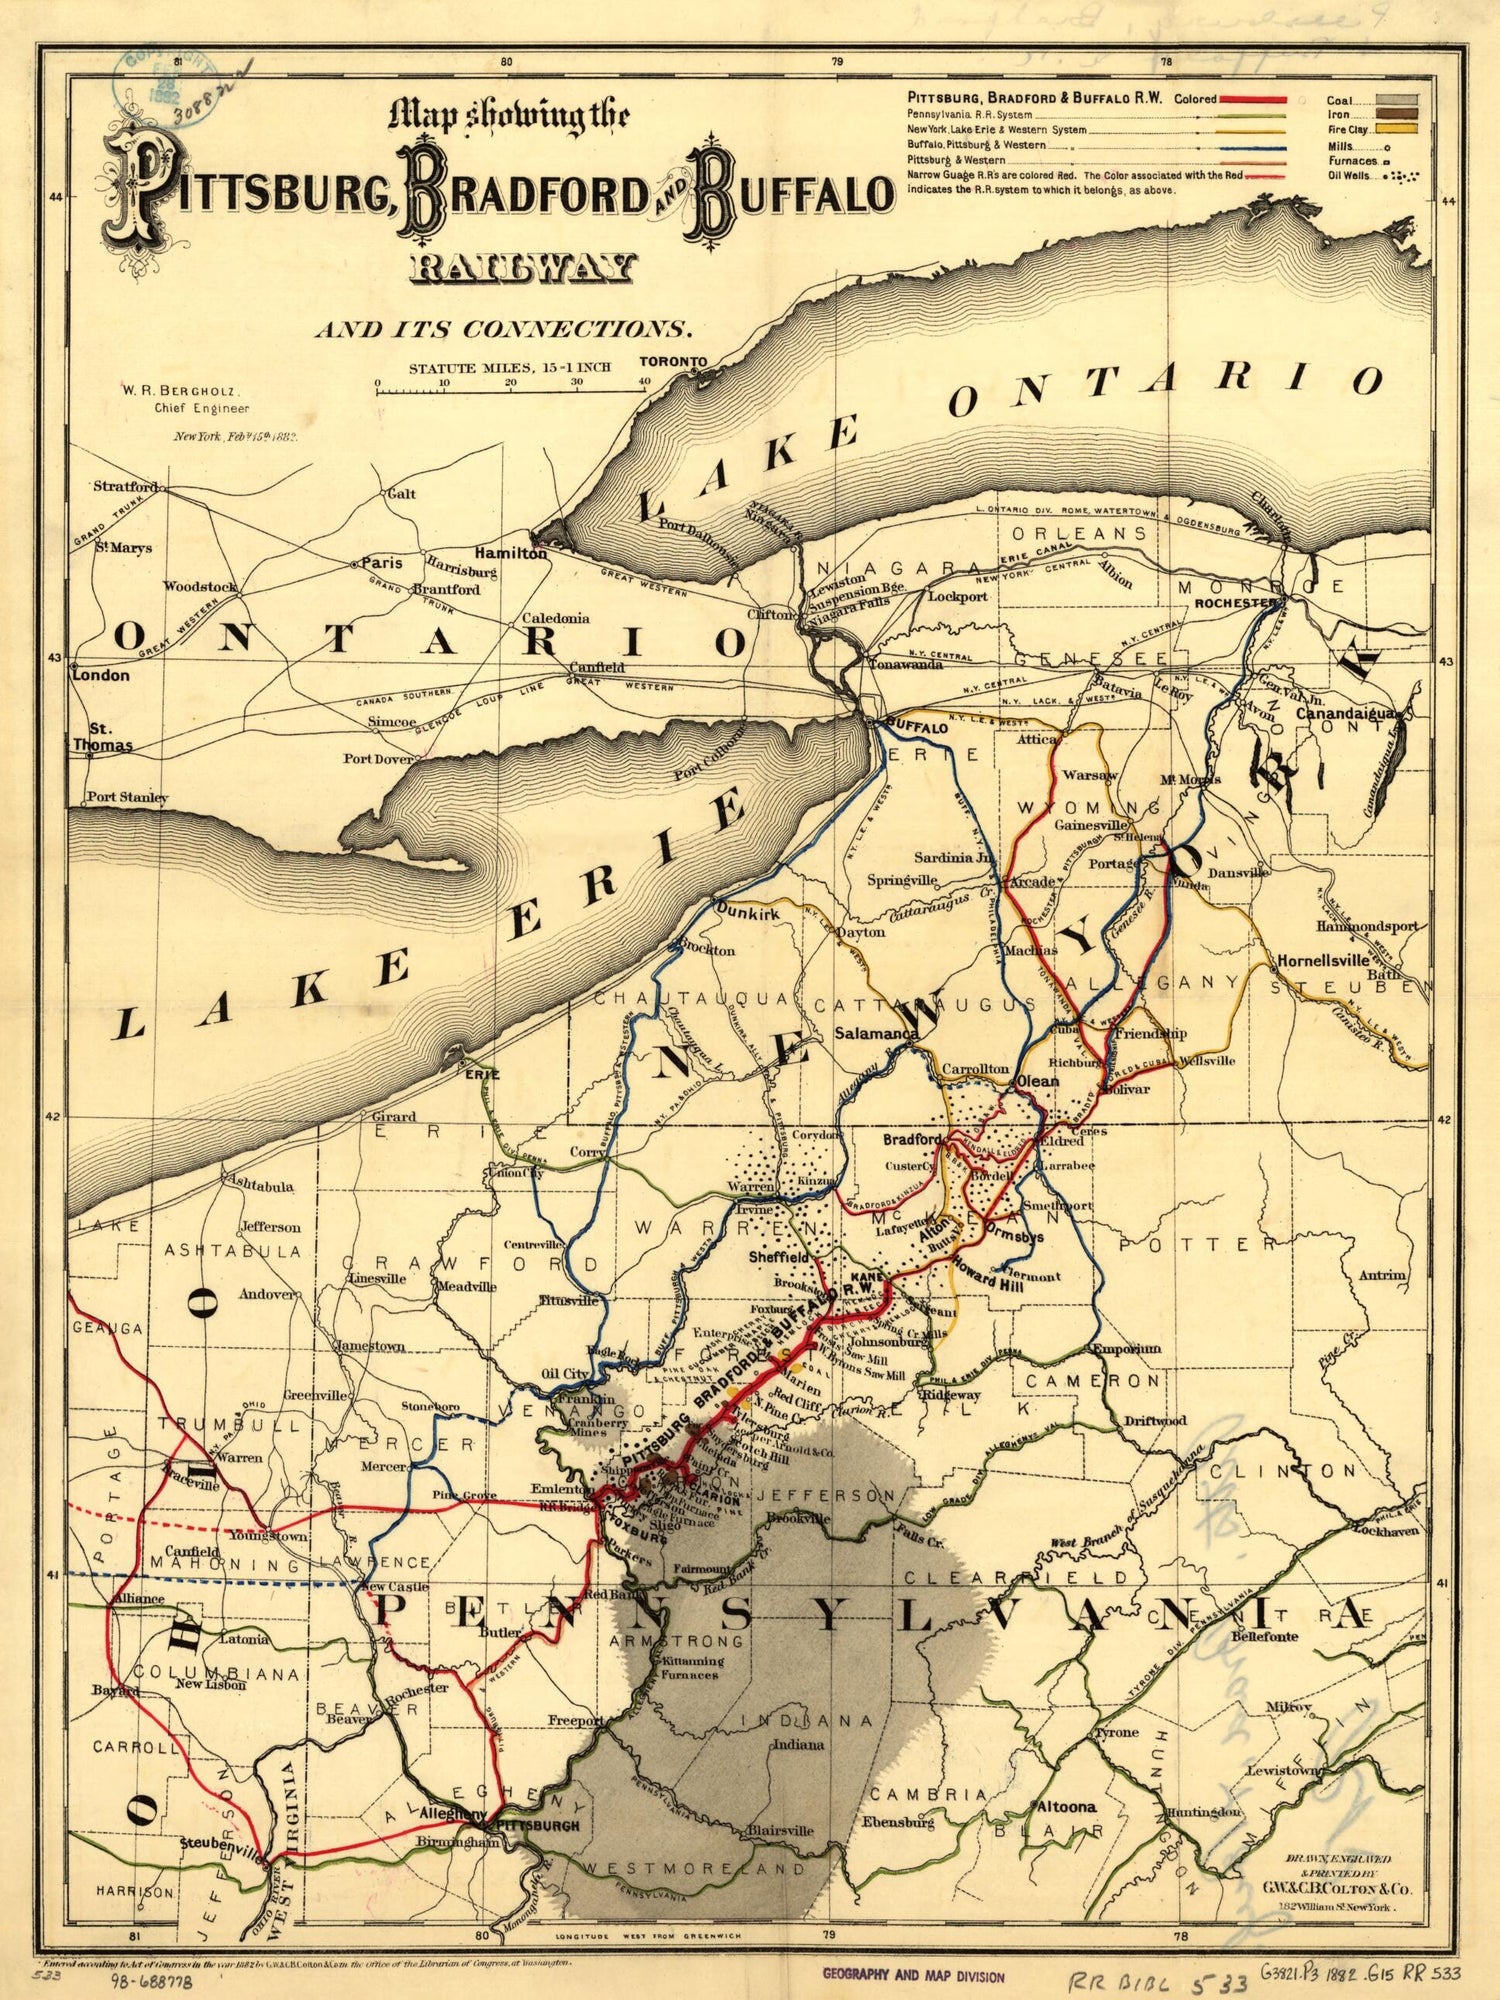 This old map of Map Showing the Pittsburg sic, Bradford, and Buffalo Railway and Its Connections, W. R. Bergholz, Chief Engineer, New York, Feb. 15, from 1882 was created by  G.W. &amp; C.B. Colton &amp; Co, Bradford Pittsburgh in 1882